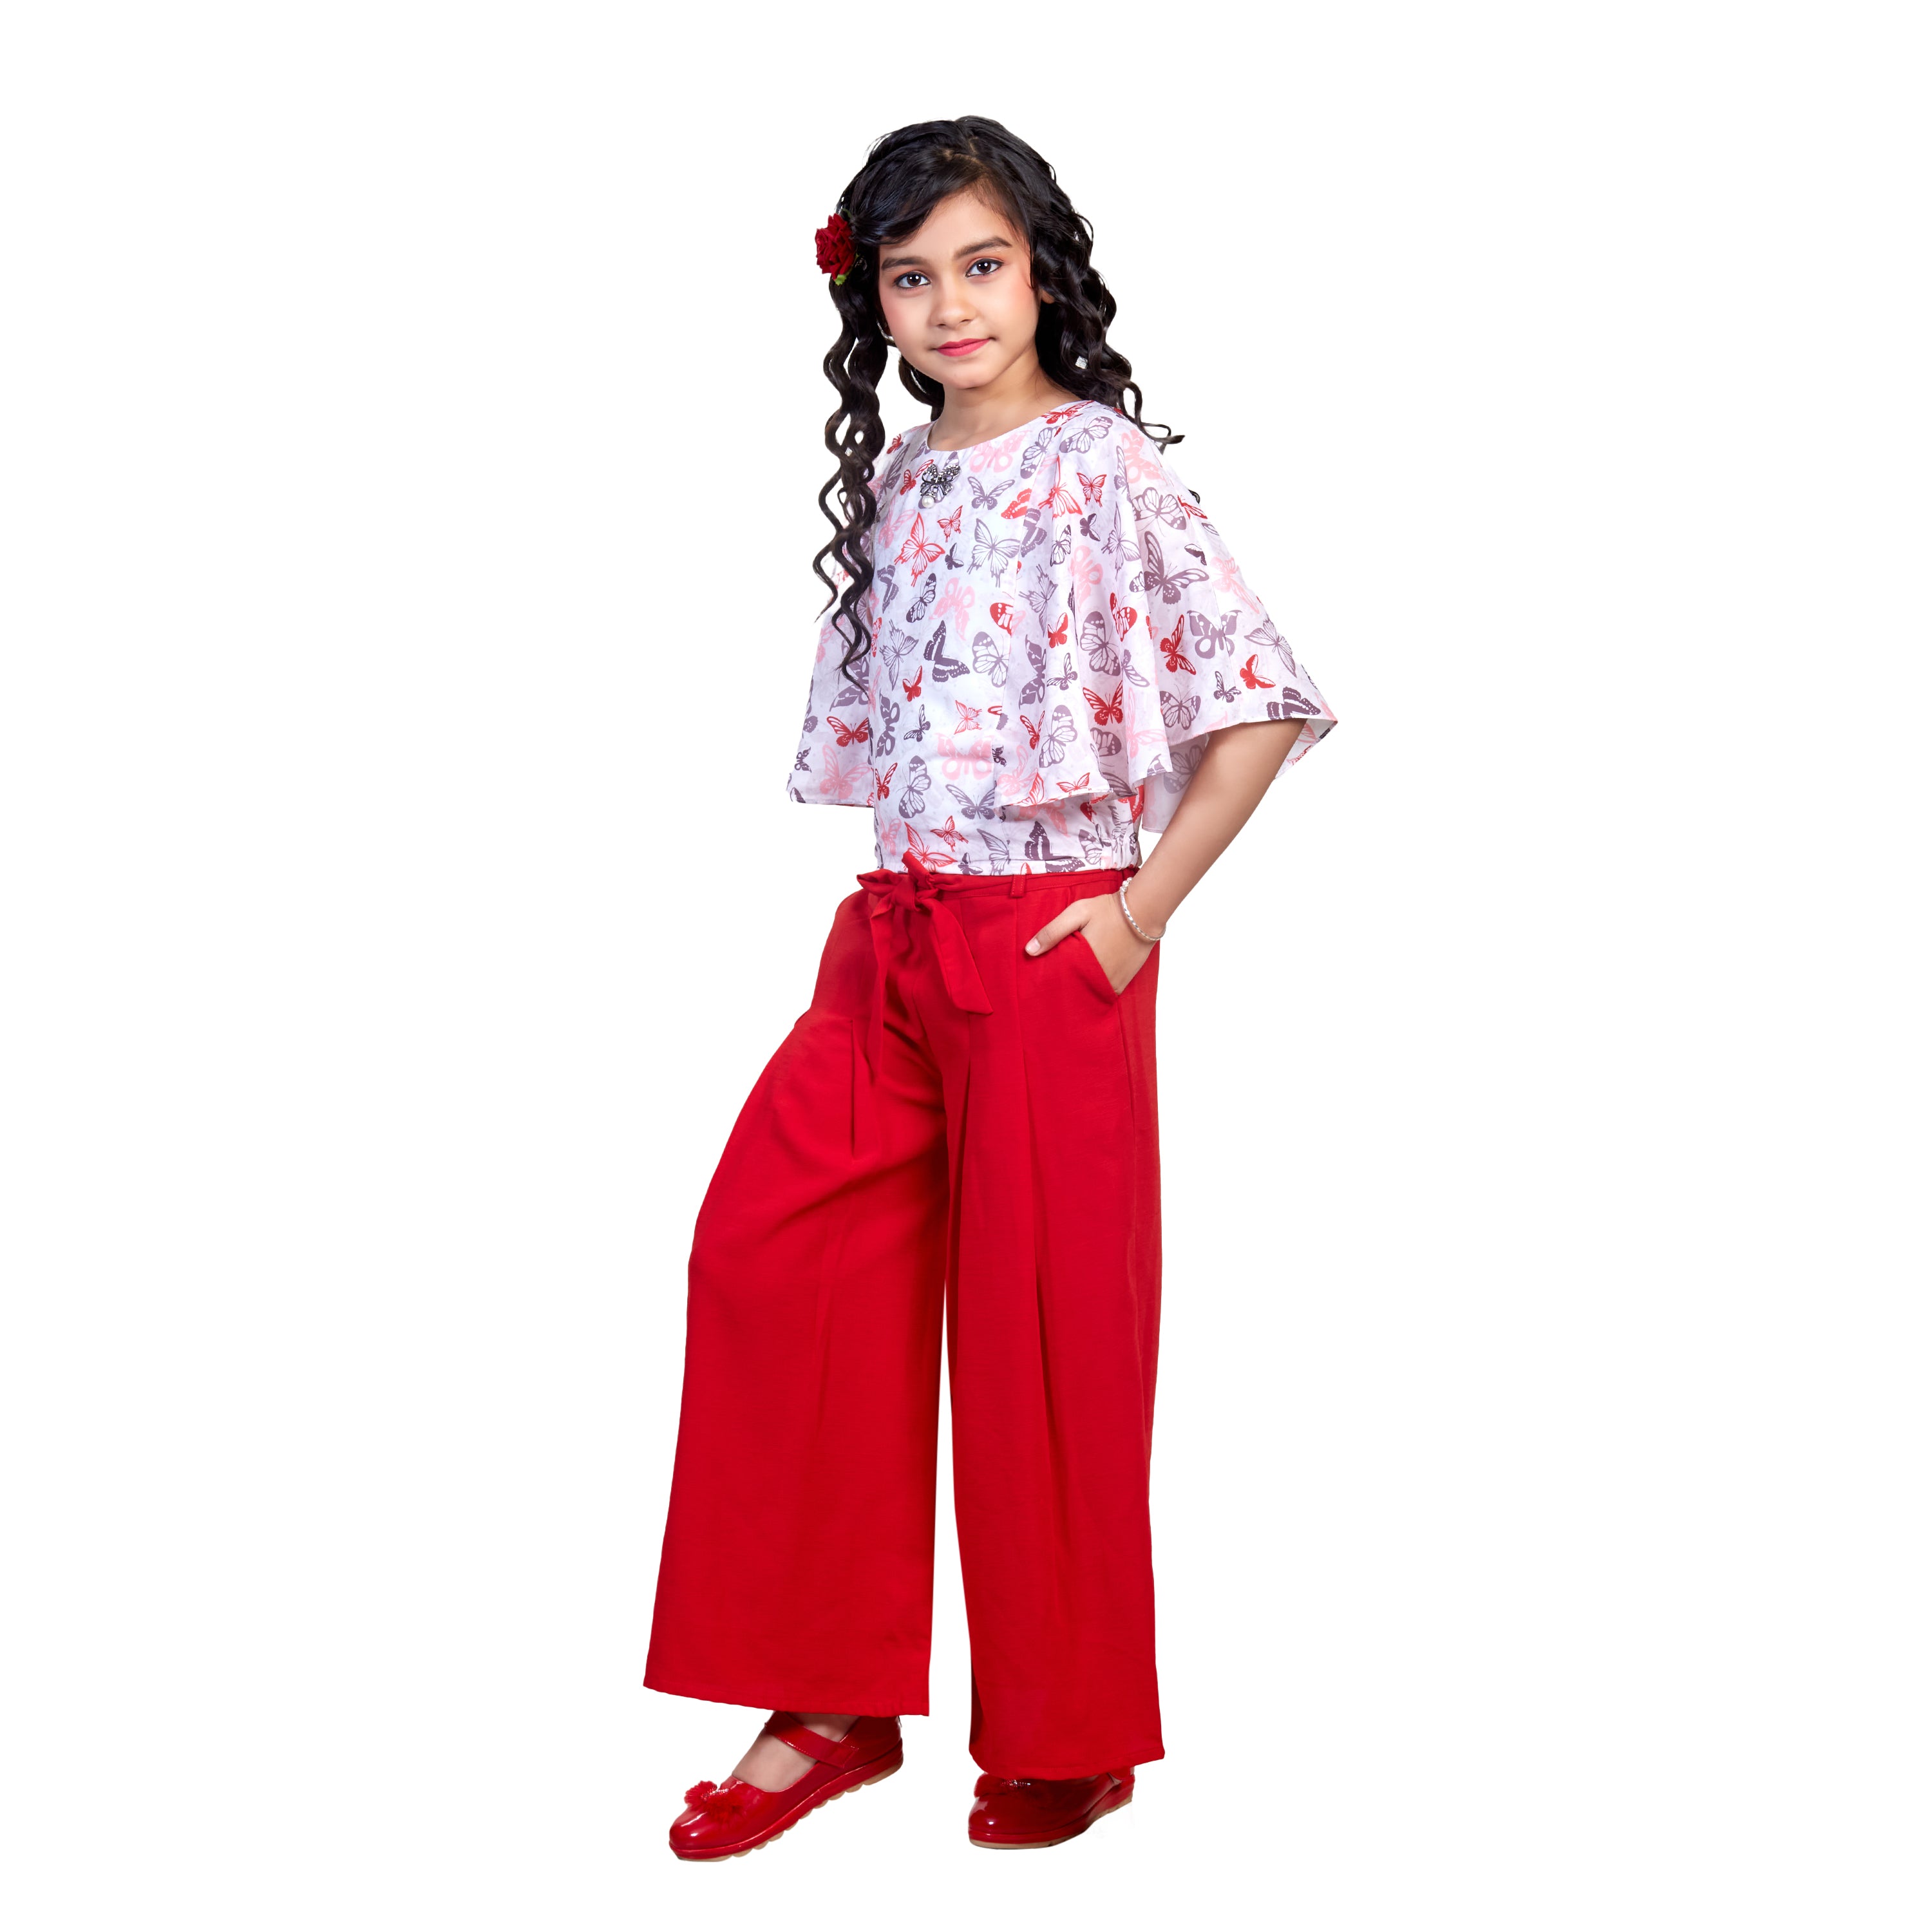 Here Comes The Weekend - Lightweight Denim Palazzo Pants for Girls 4-16 |  Roxy